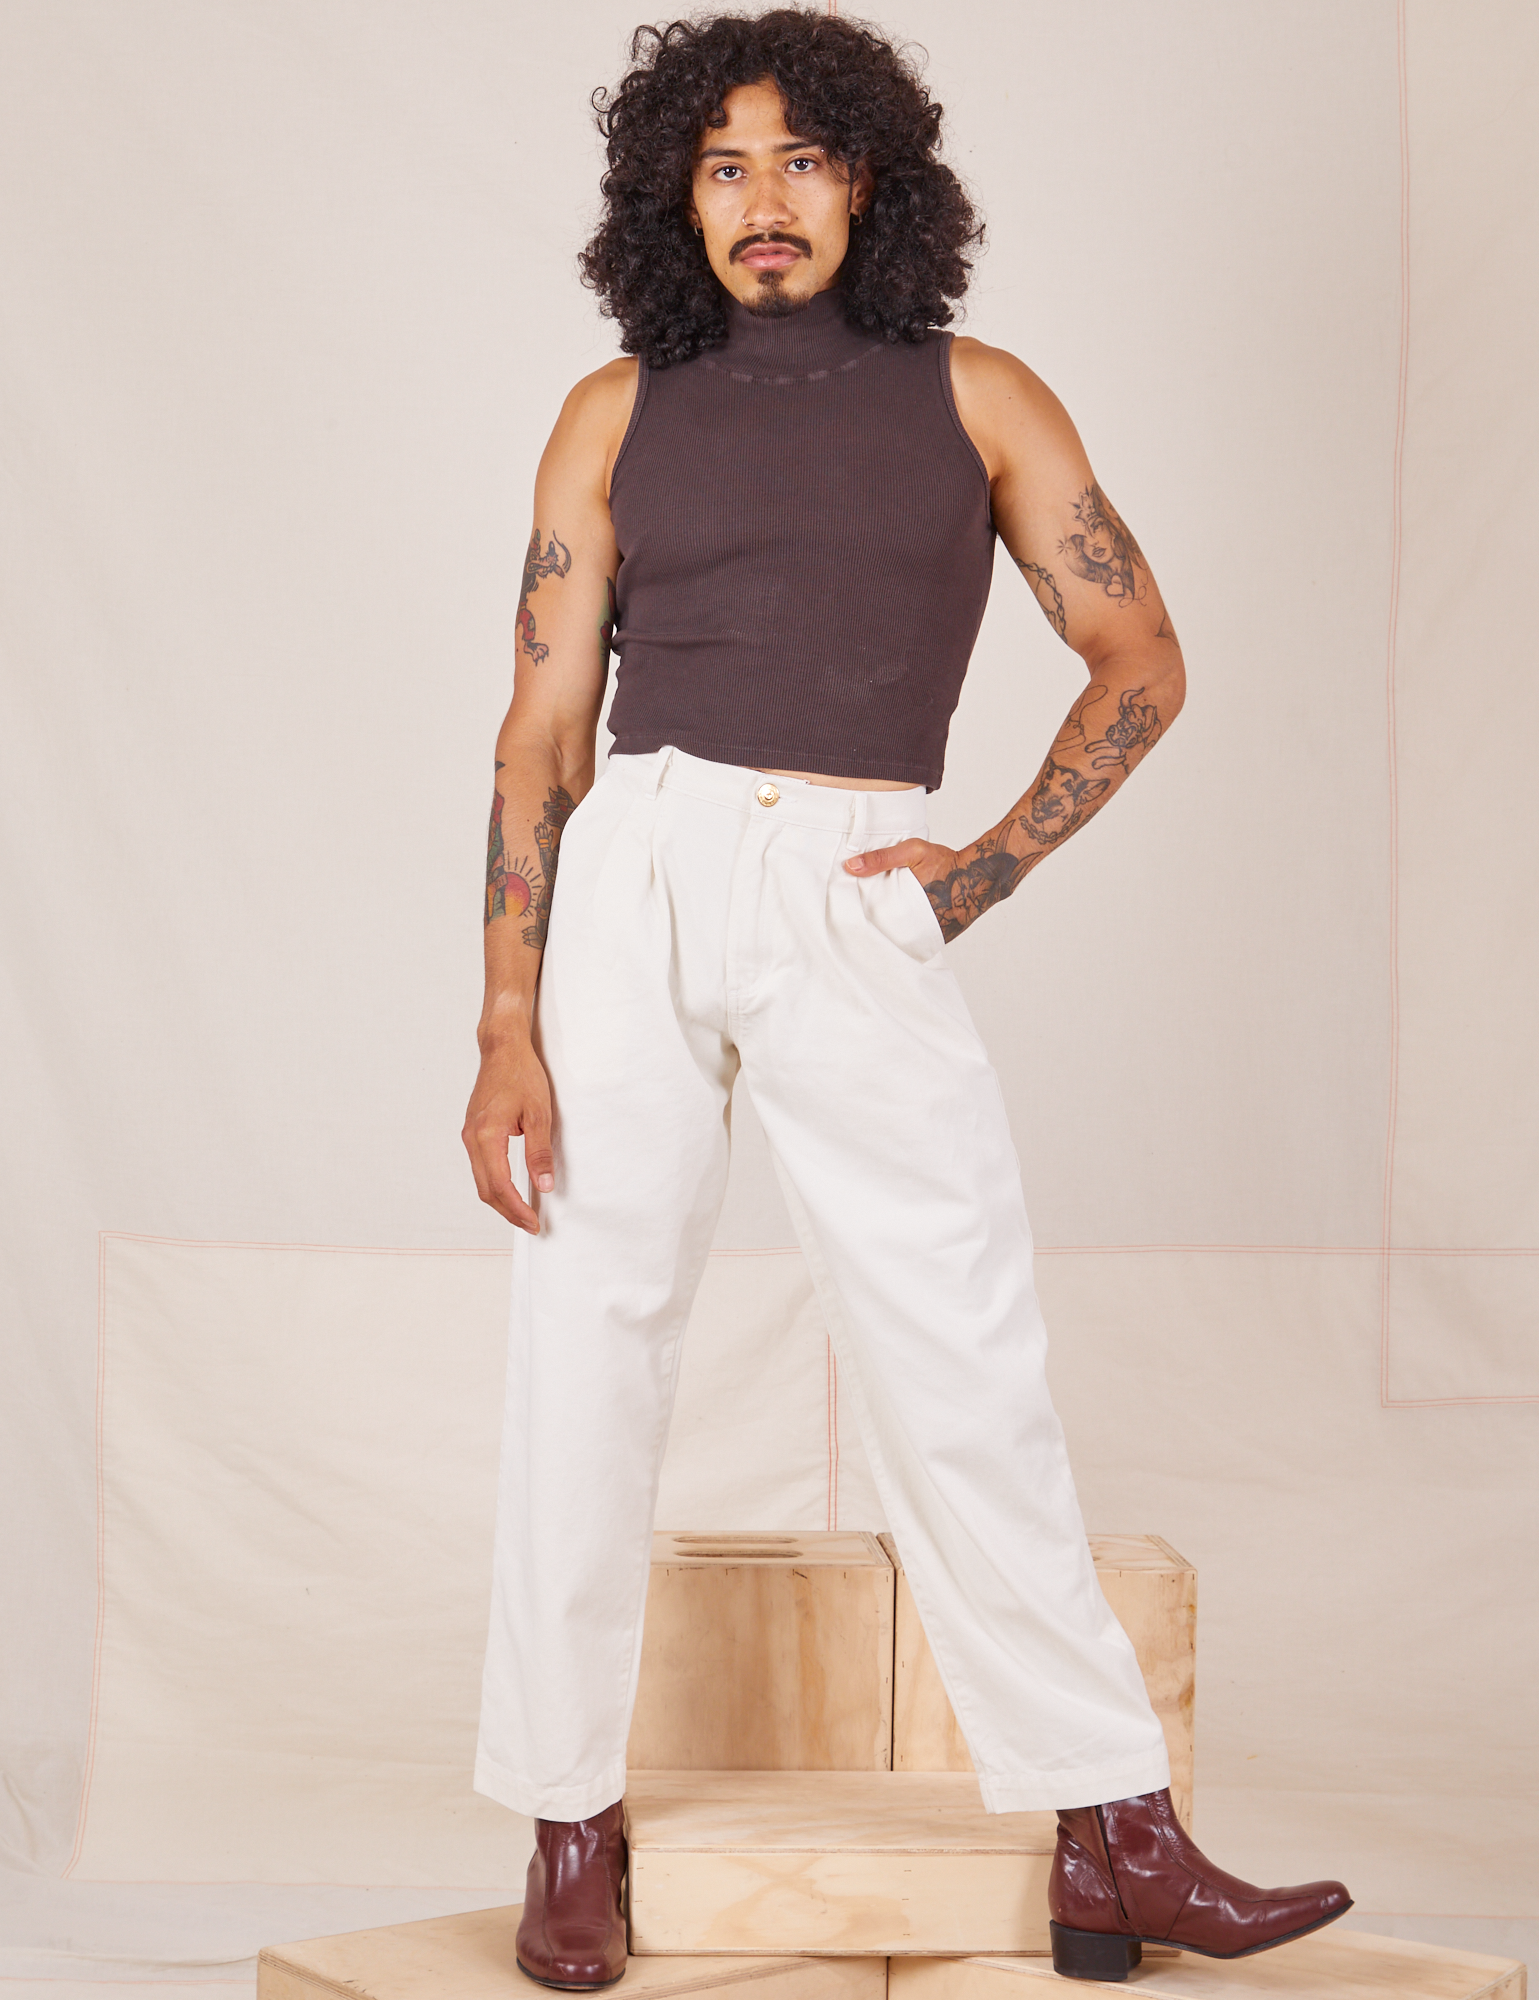 Jesse is 5&#39;8&quot; and wearing XXS Heavyweight Trousers in Vintage Tee Off-White and espresso brown Sleeveless Turtleneck.